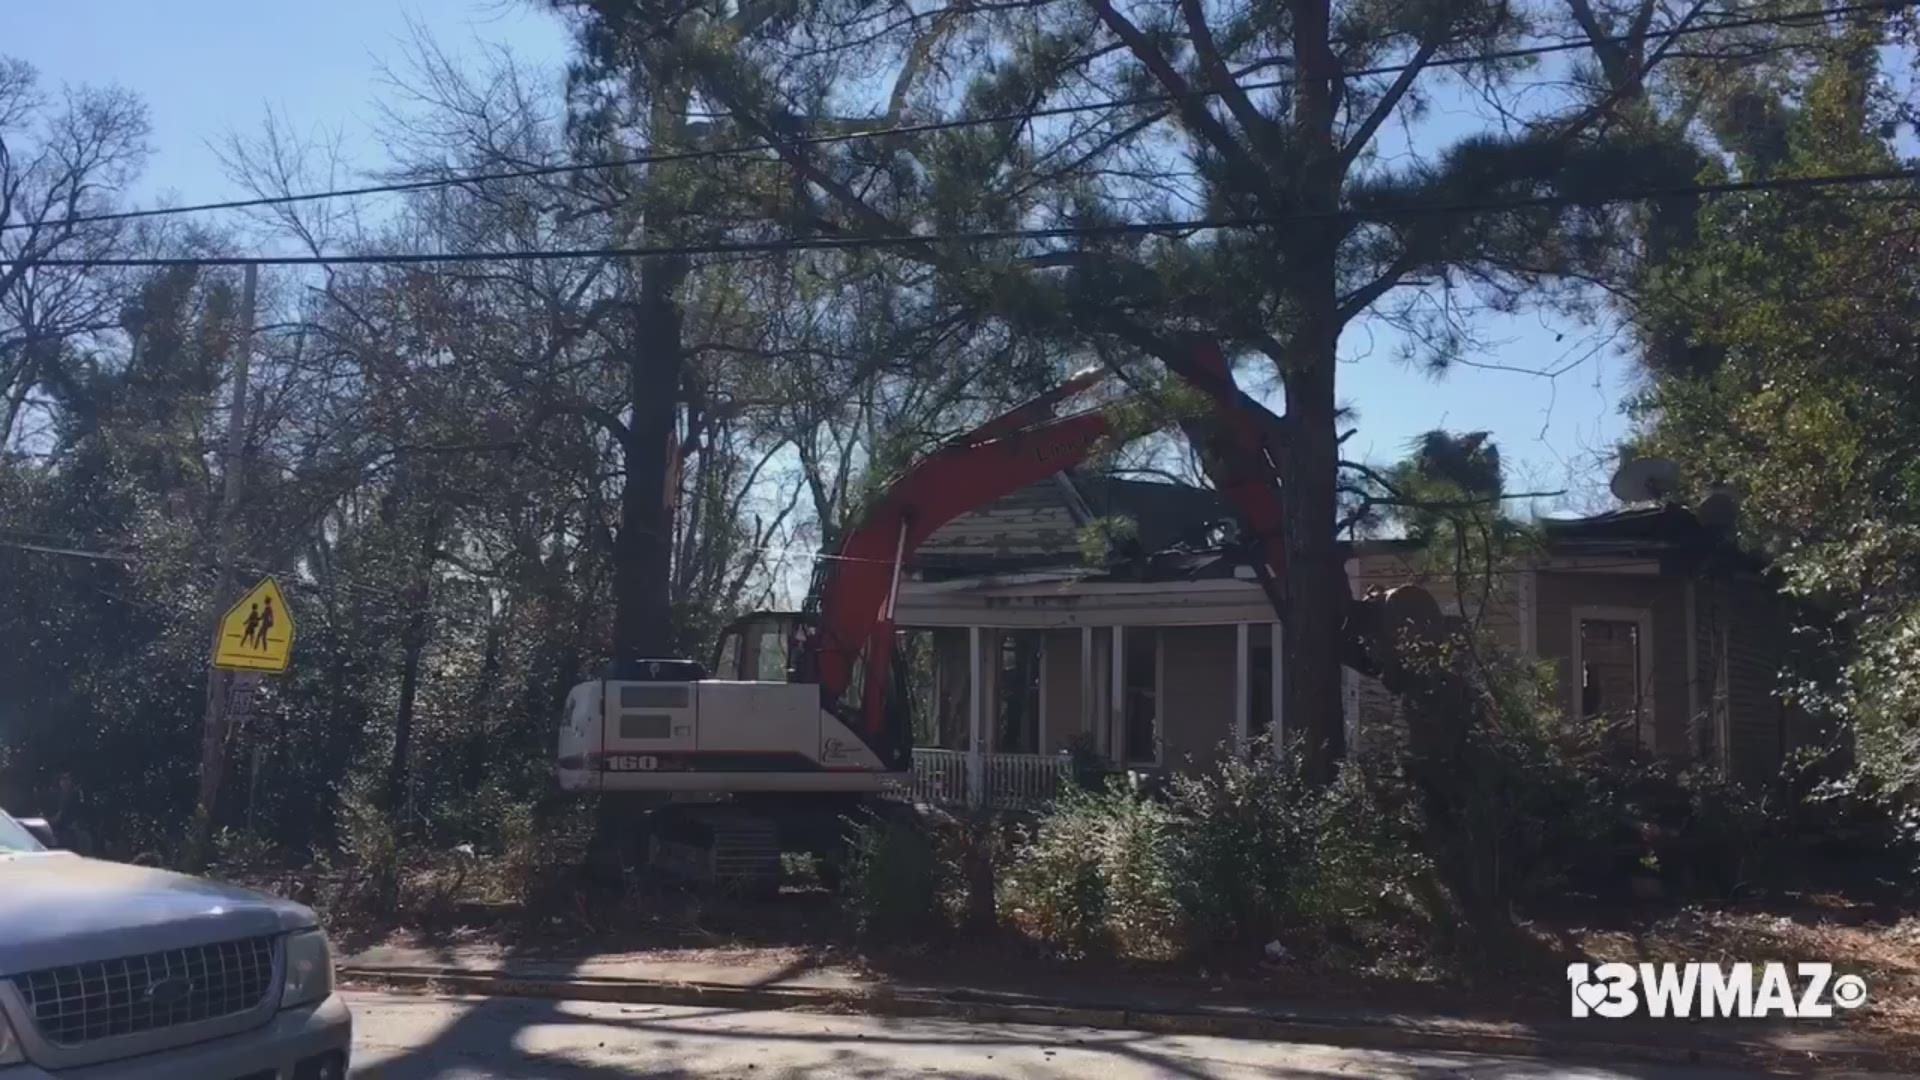 As part of its effort to attack blight in neighborhoods, the Macon-Bibb County Commission approved additional funds in this year’s budget to demolish blighted houses